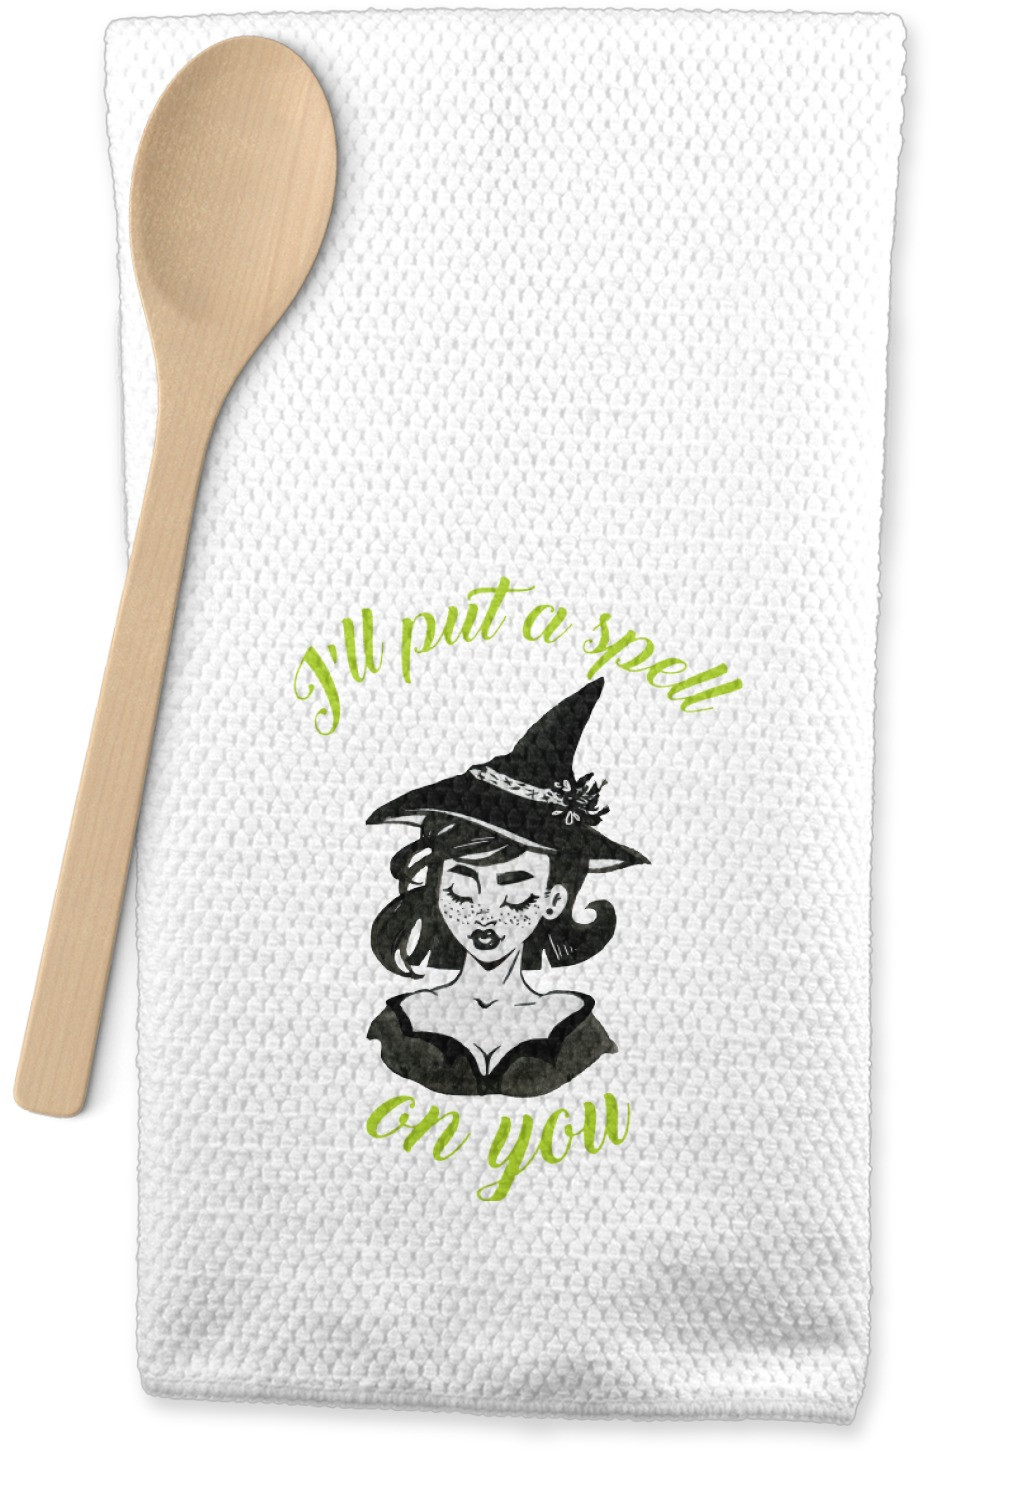 Halloween Kitchen Towels
 Witches Halloween Waffle Weave Kitchen Towel